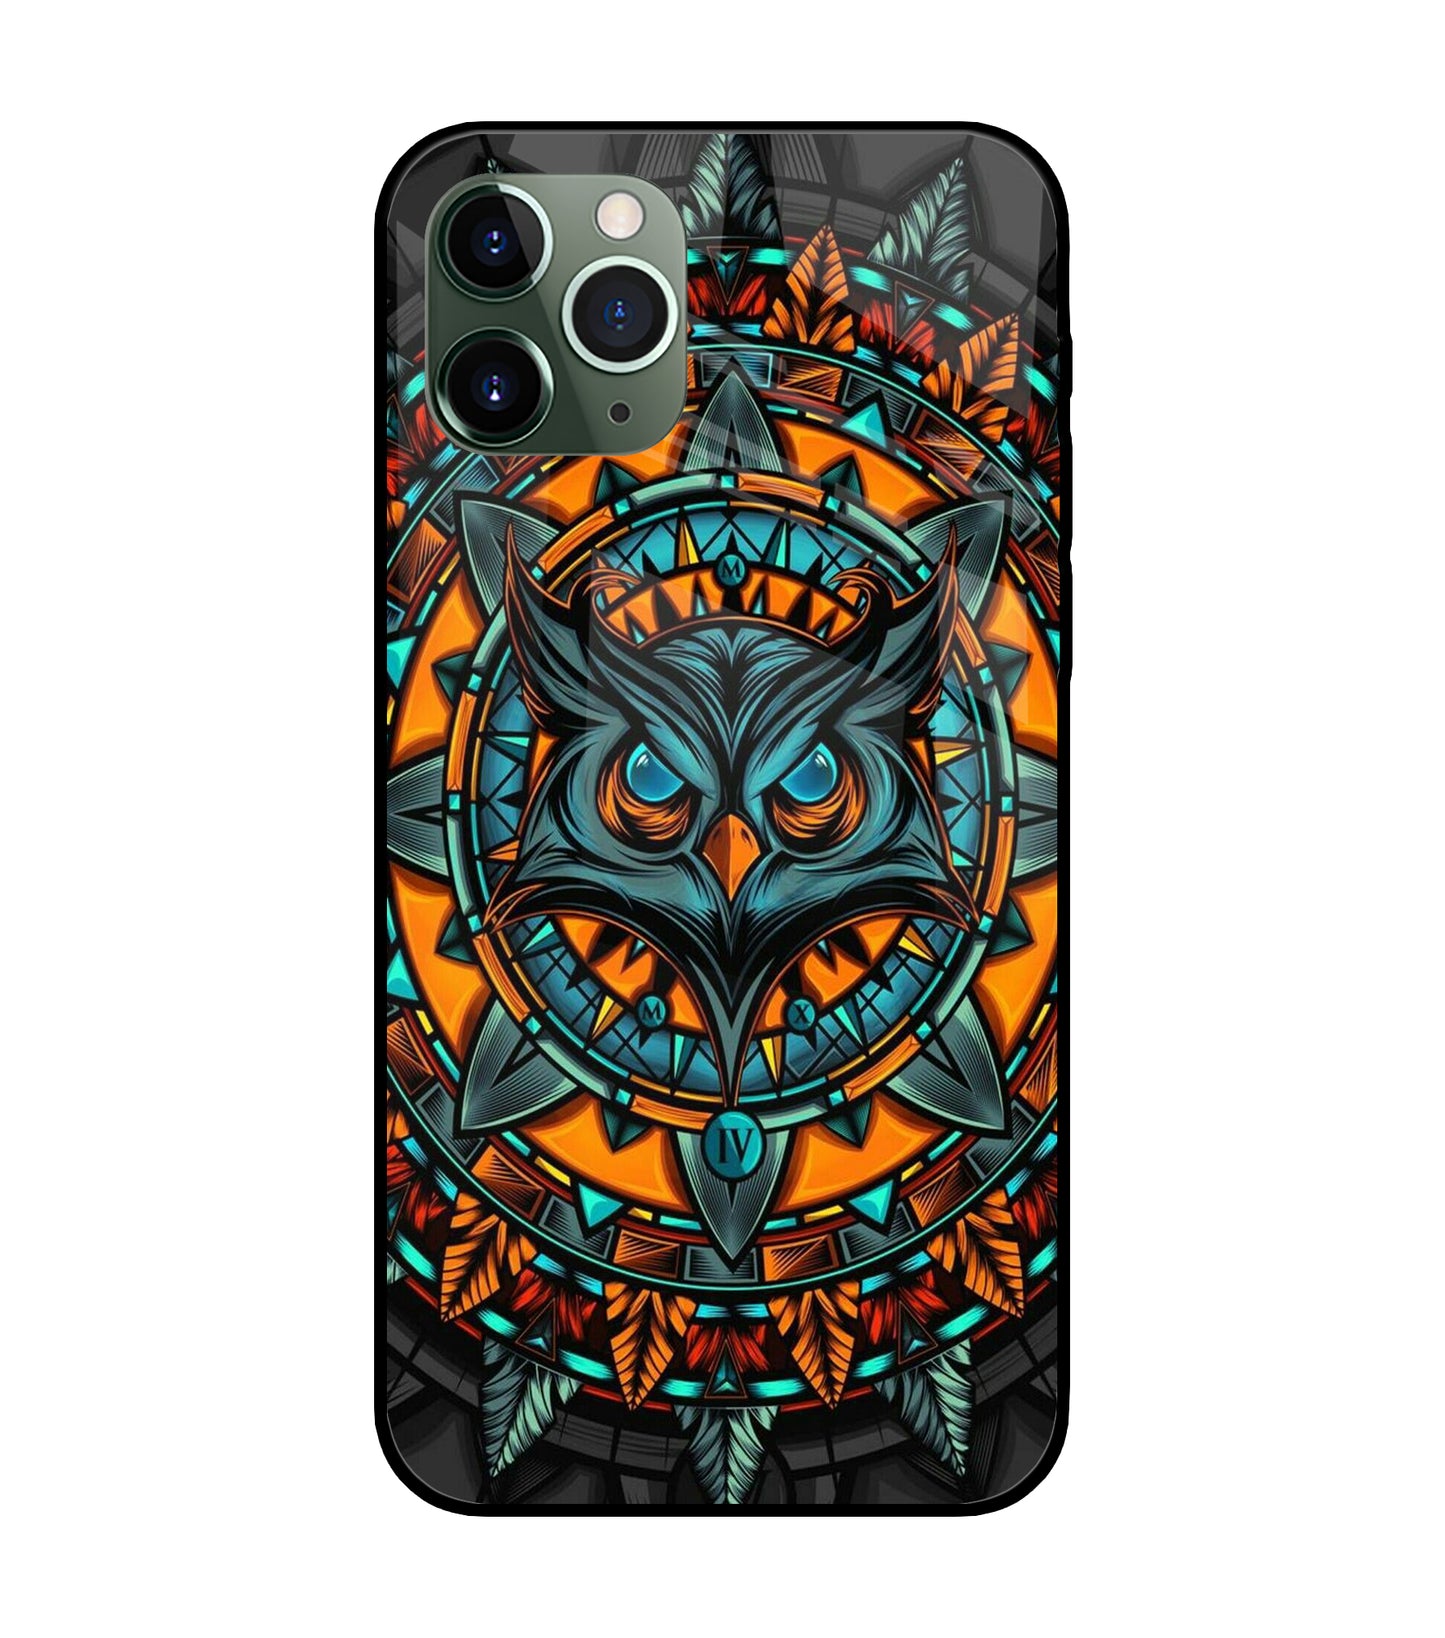 Angry Owl Art iPhone 11 Pro Max Glass Cover